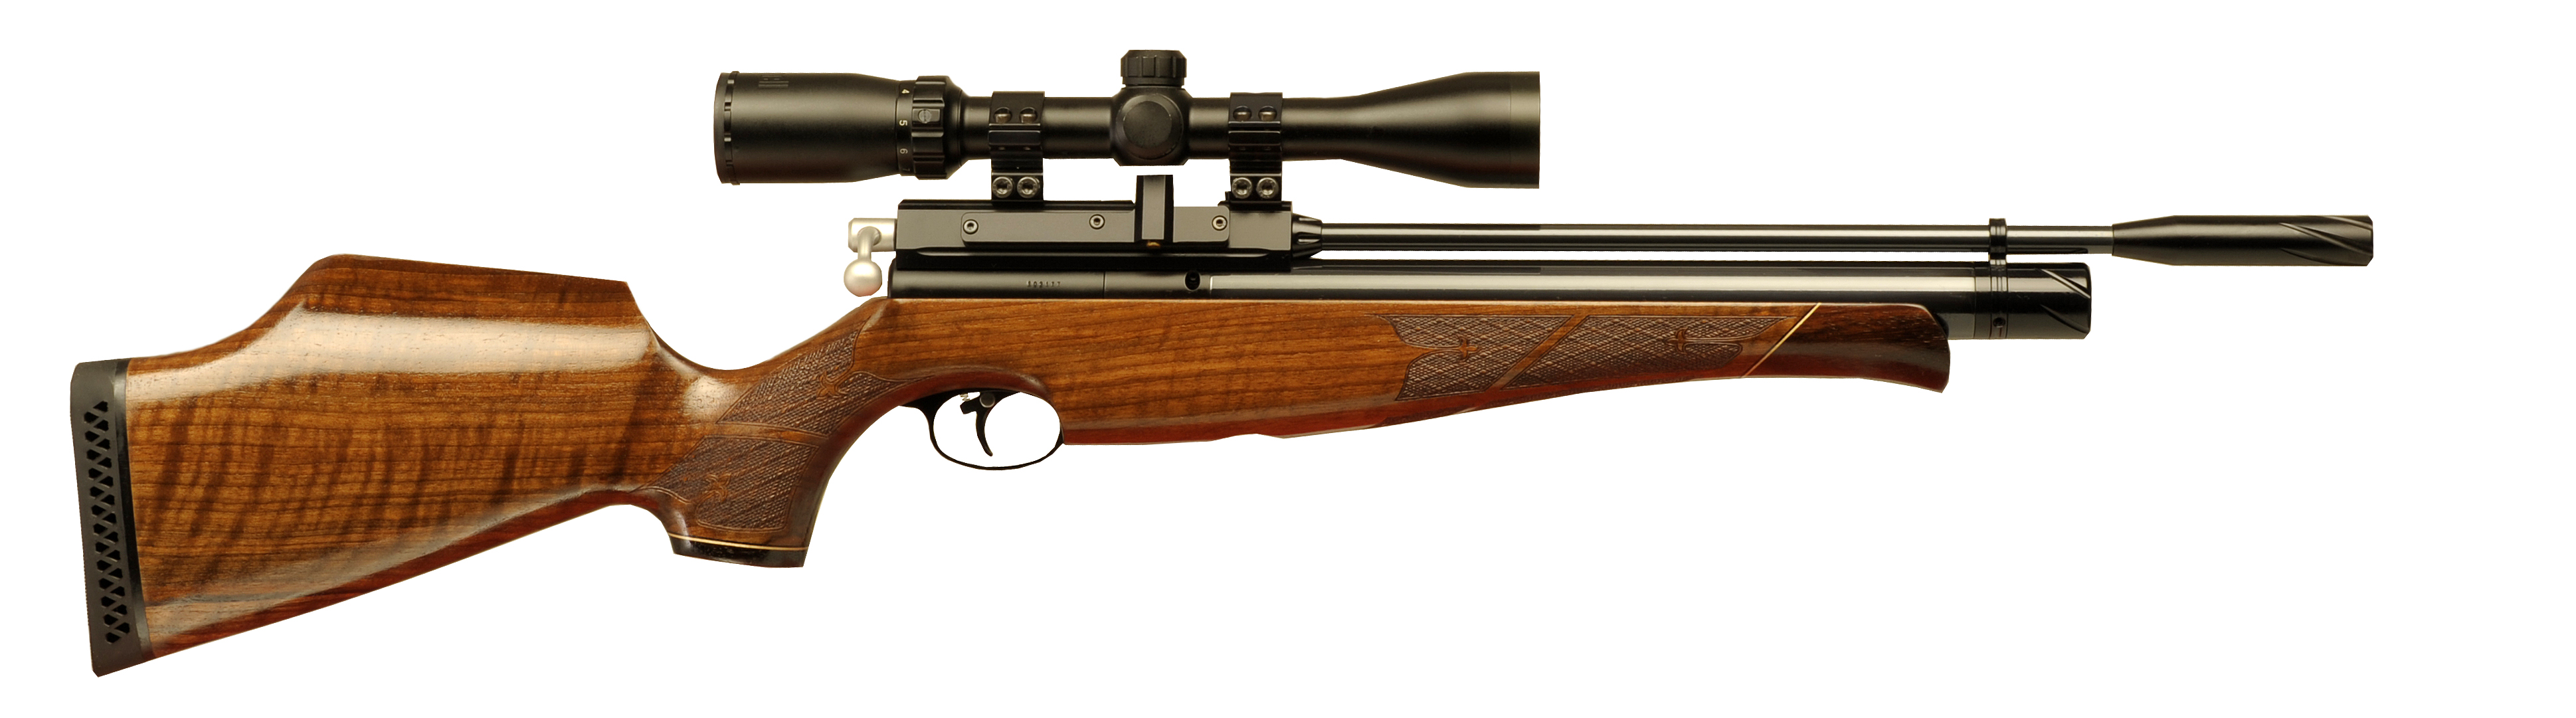 Air Arms S410 pre-charged rifle.